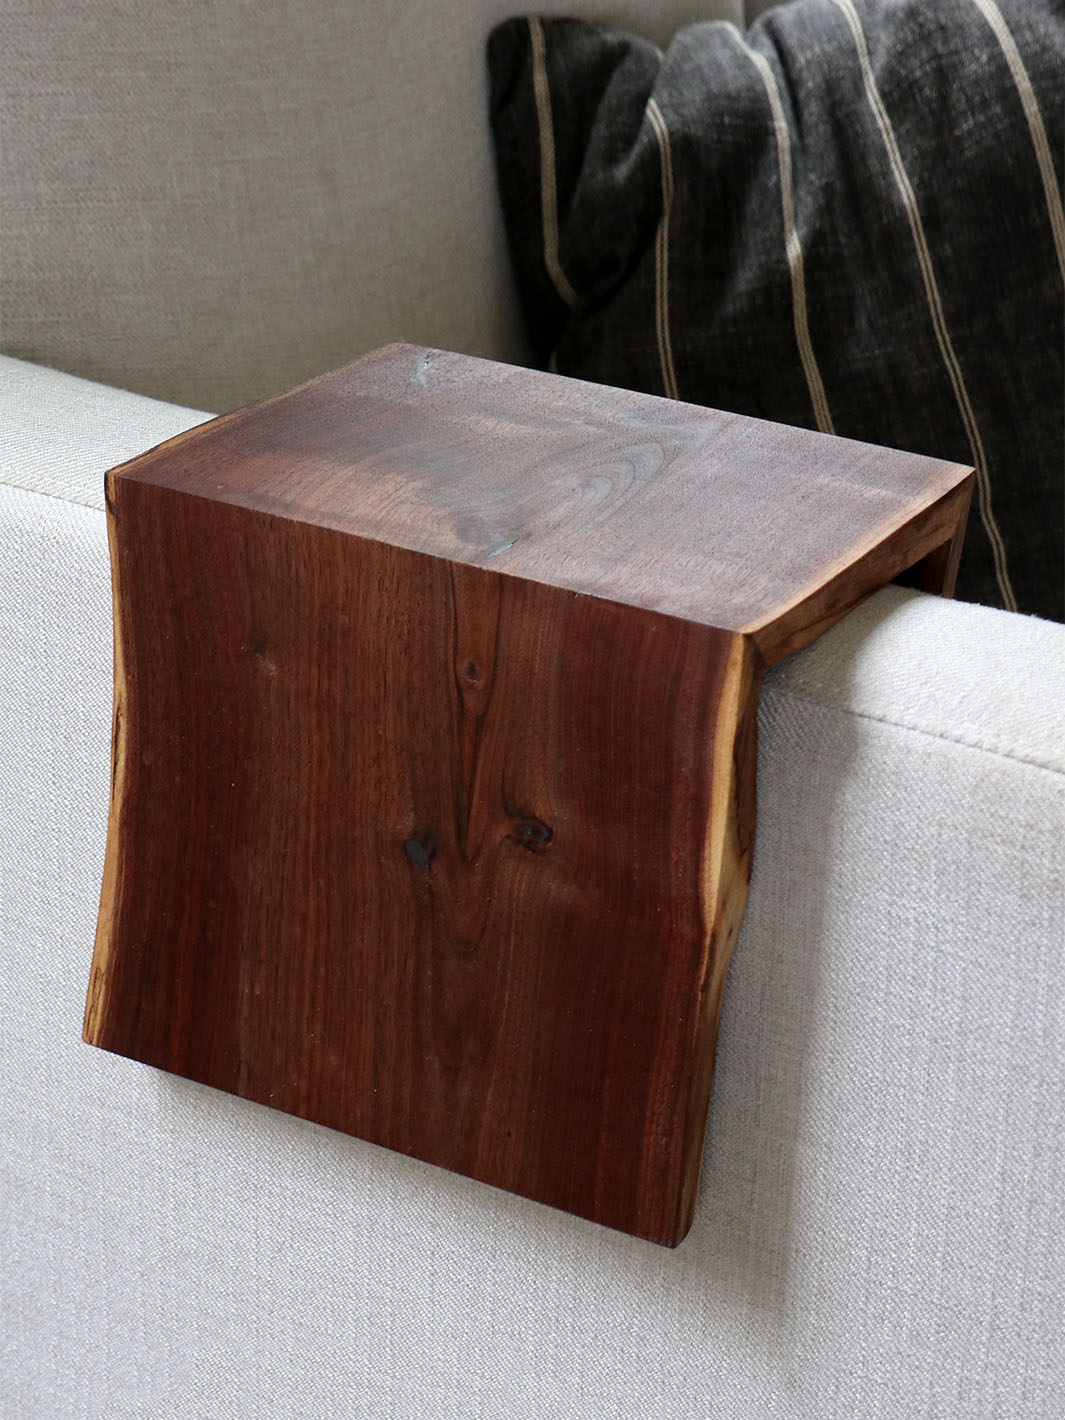 Earthly Comfort 5" Live Edge Walnut Wood Armrest Table Earthly Comfort Coffee Tables 2239-1